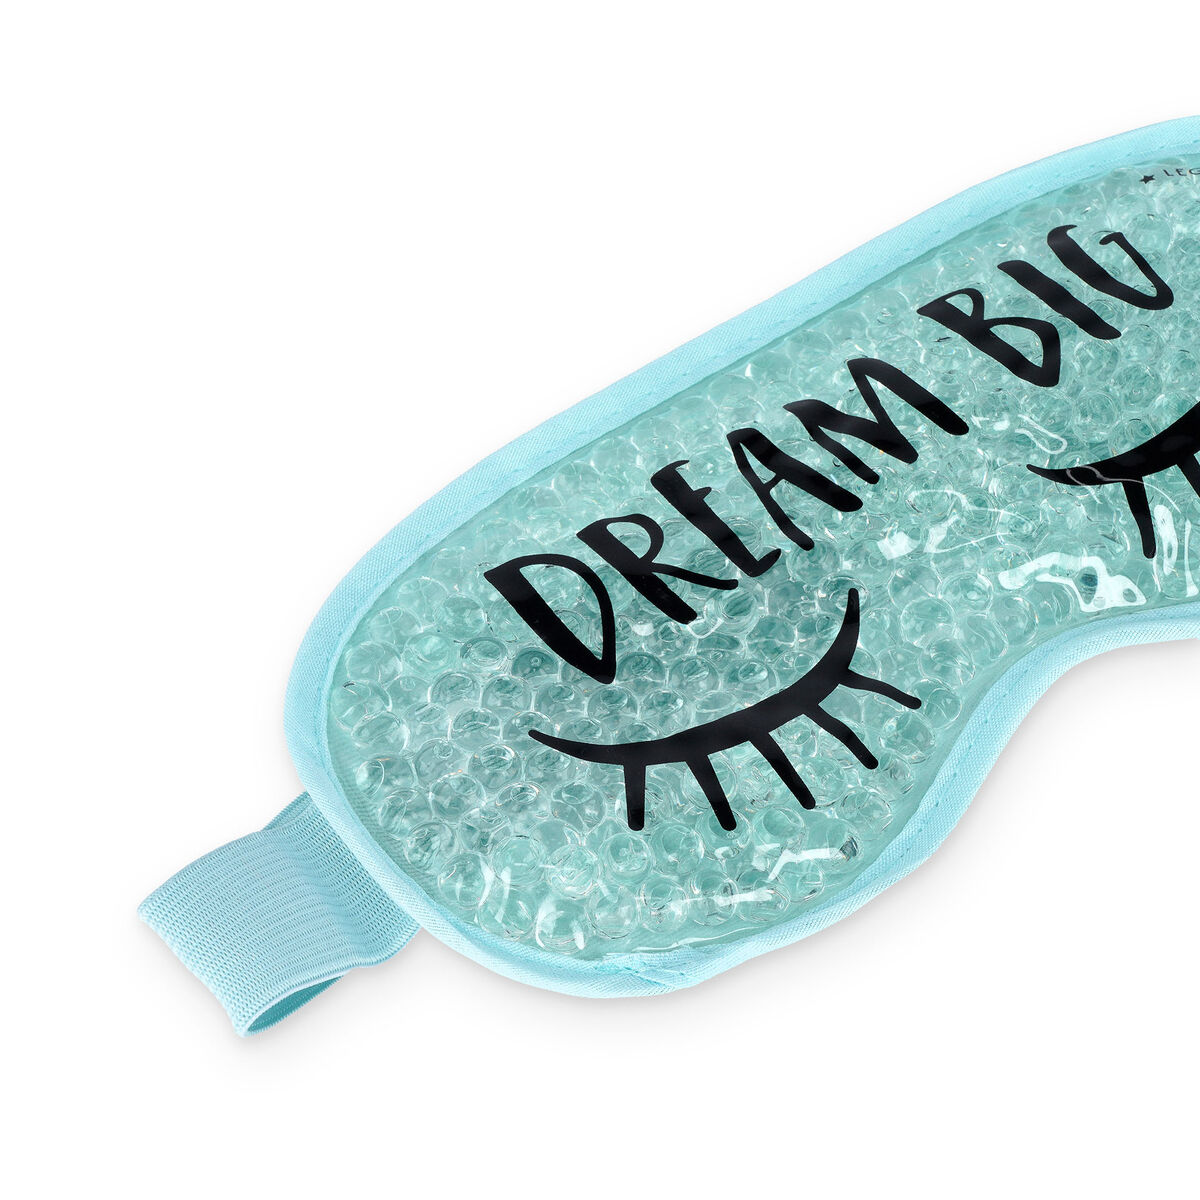 Chill Out - Gel Eye Mask, , zoo